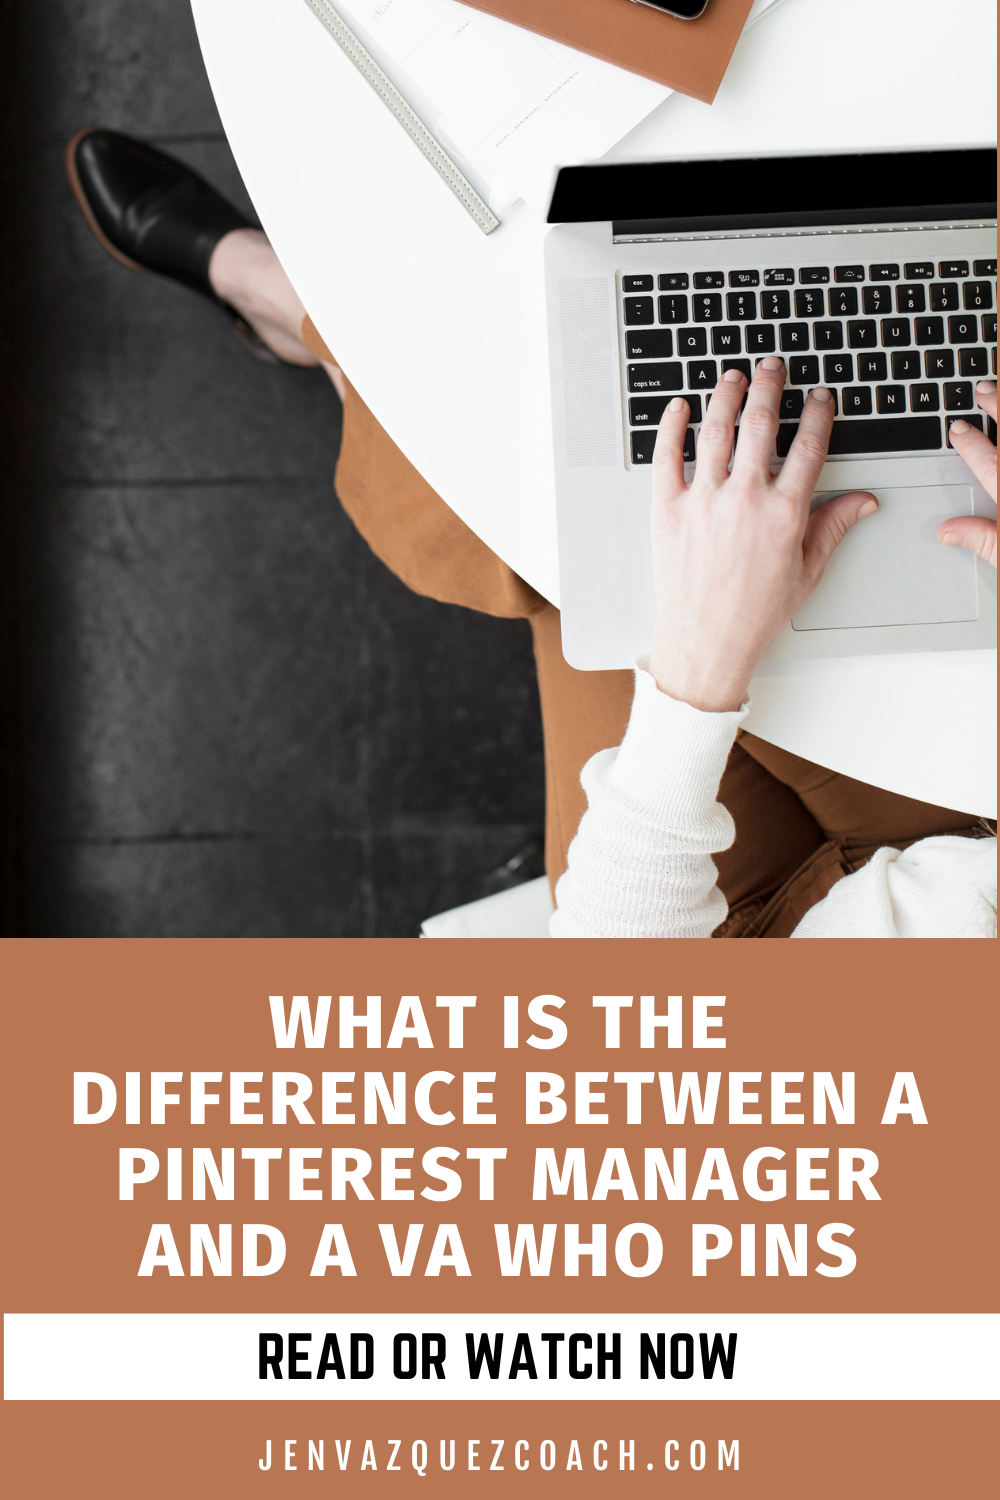 What Is The Difference Between A Pinterest Manager And a VA Who Pins